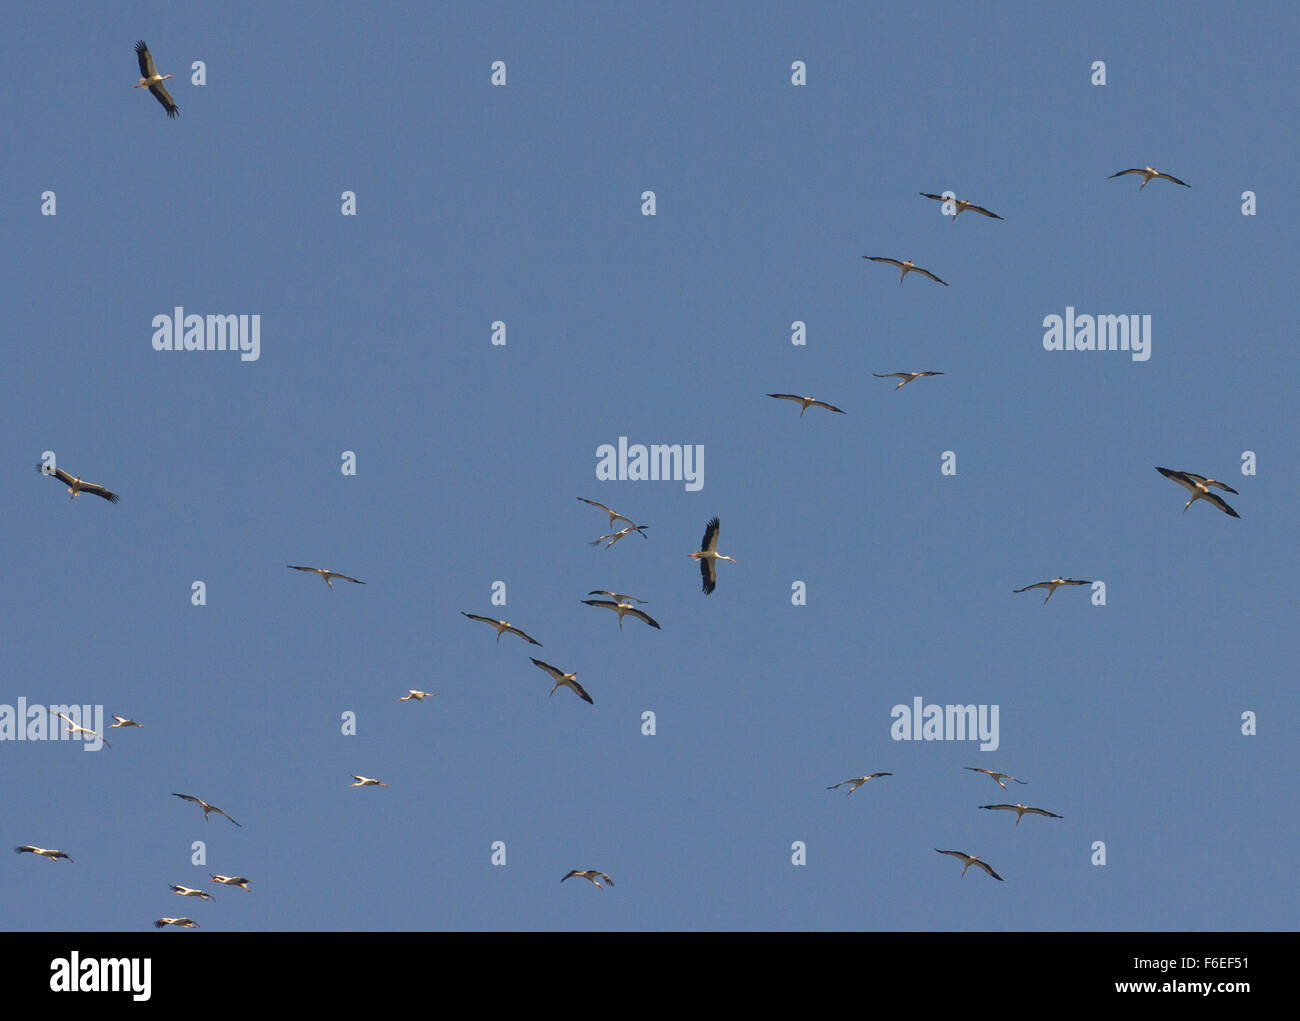 Istanbul with birds flying against blue sky Stock Photo